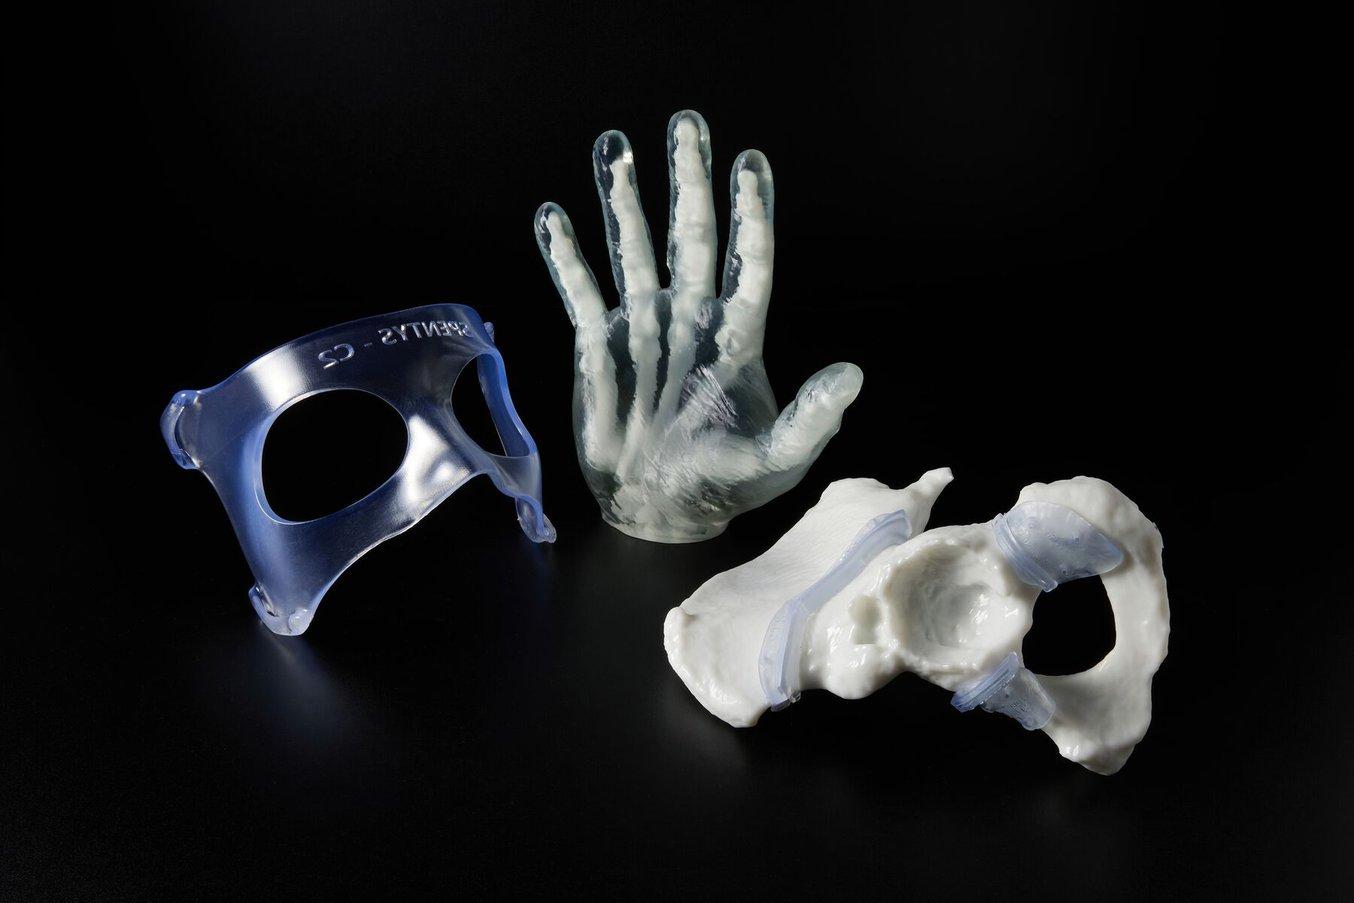 3D printed medical devices